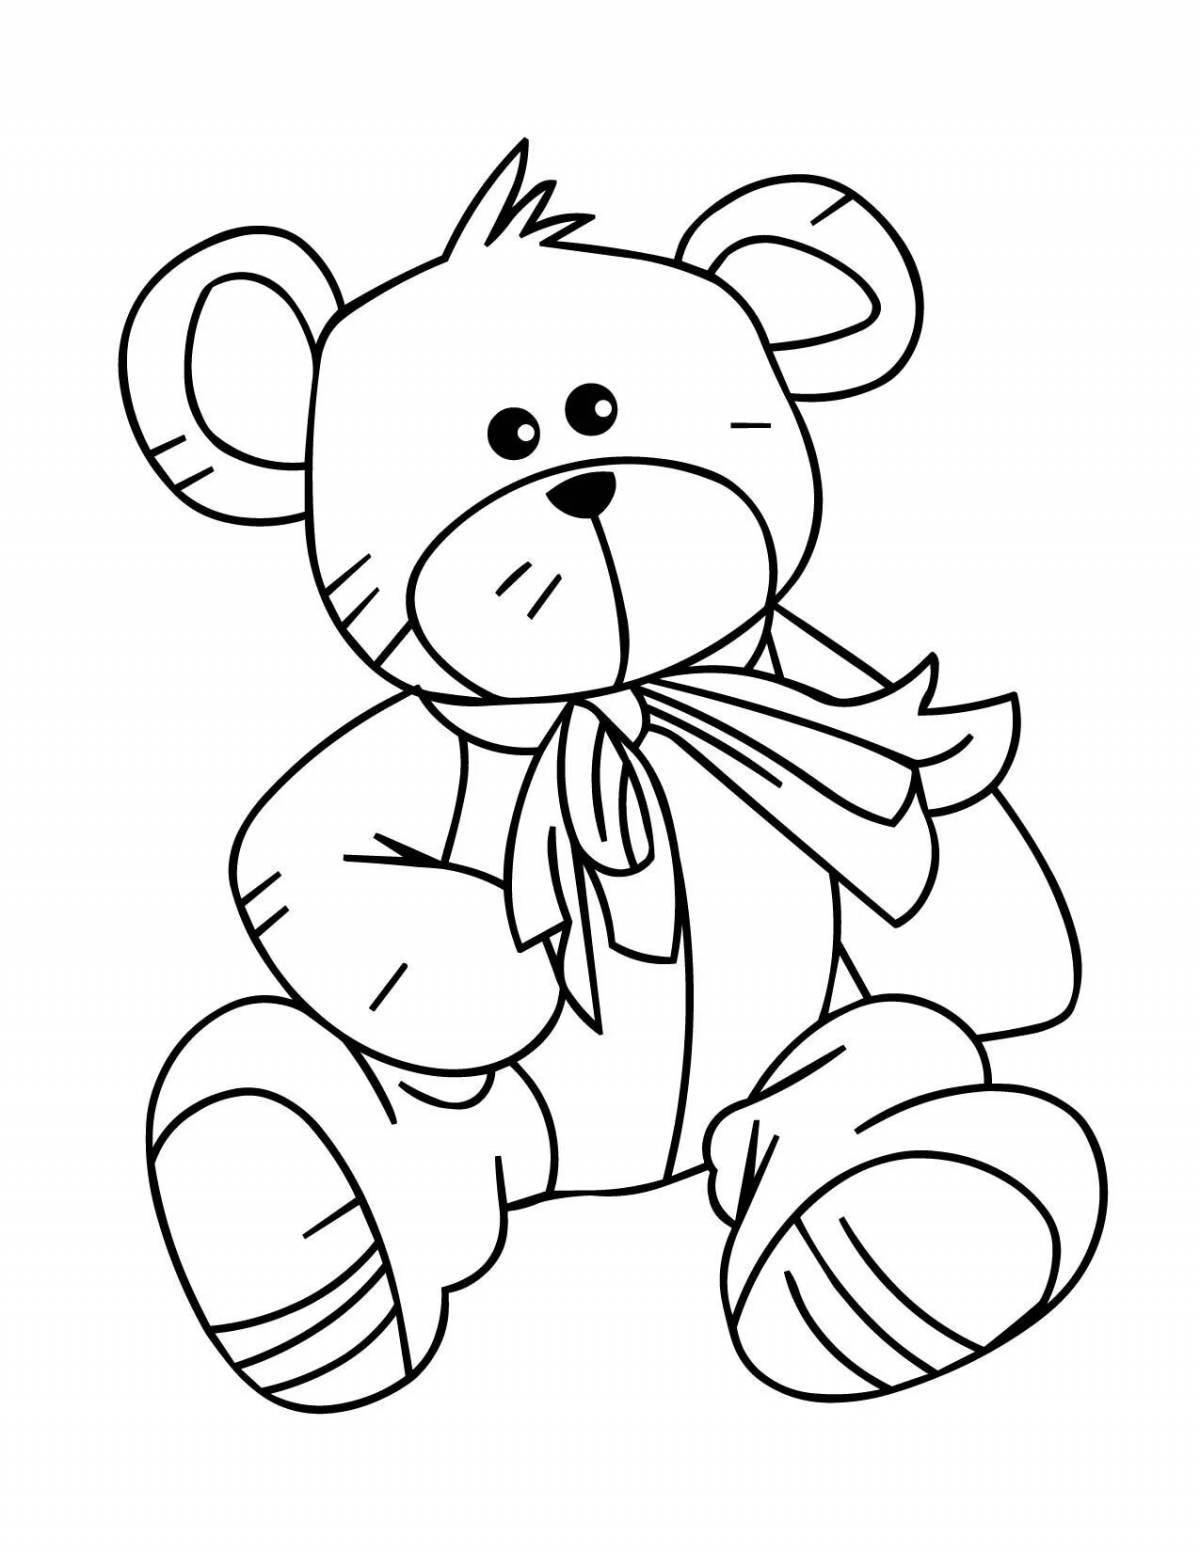 Glitter bear toy coloring book